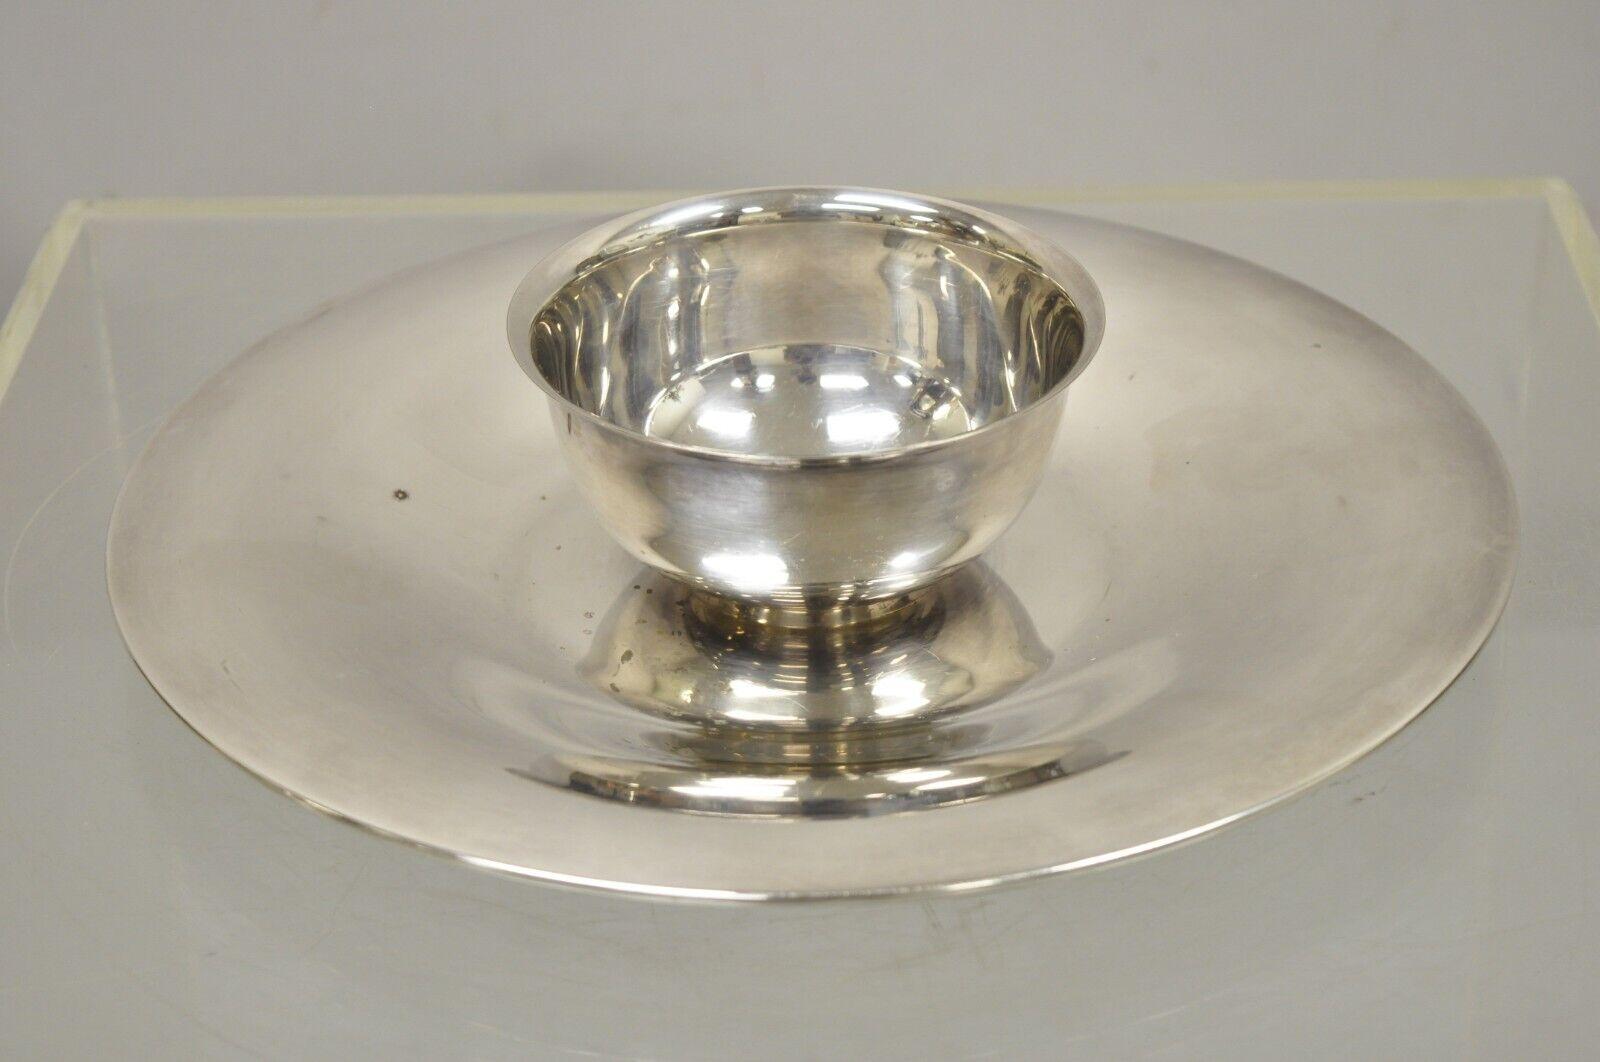 Modern Oneida Silver Plate Serving Platter Dish Shrimp Cocktail Chips and Dip Tray